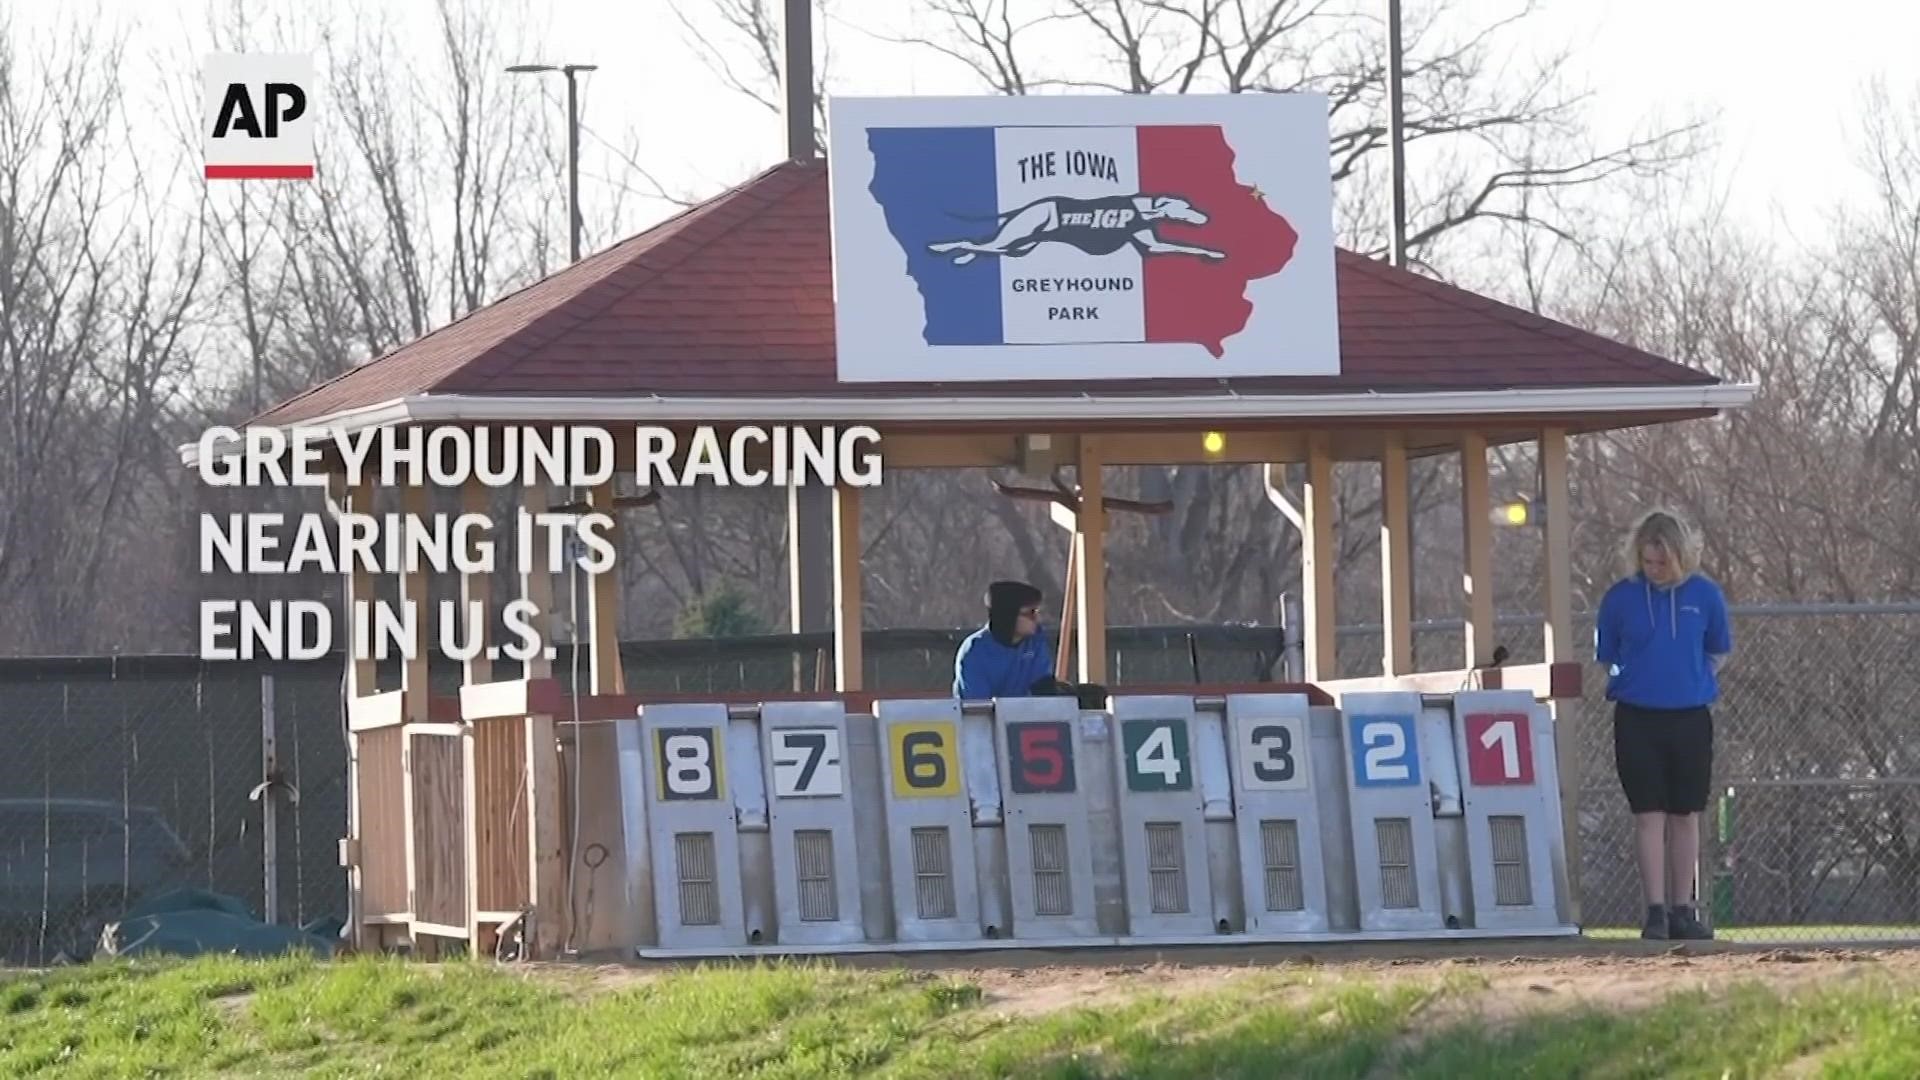 By the end of the year, there will only be two Greyhound racing tracks left in the country.